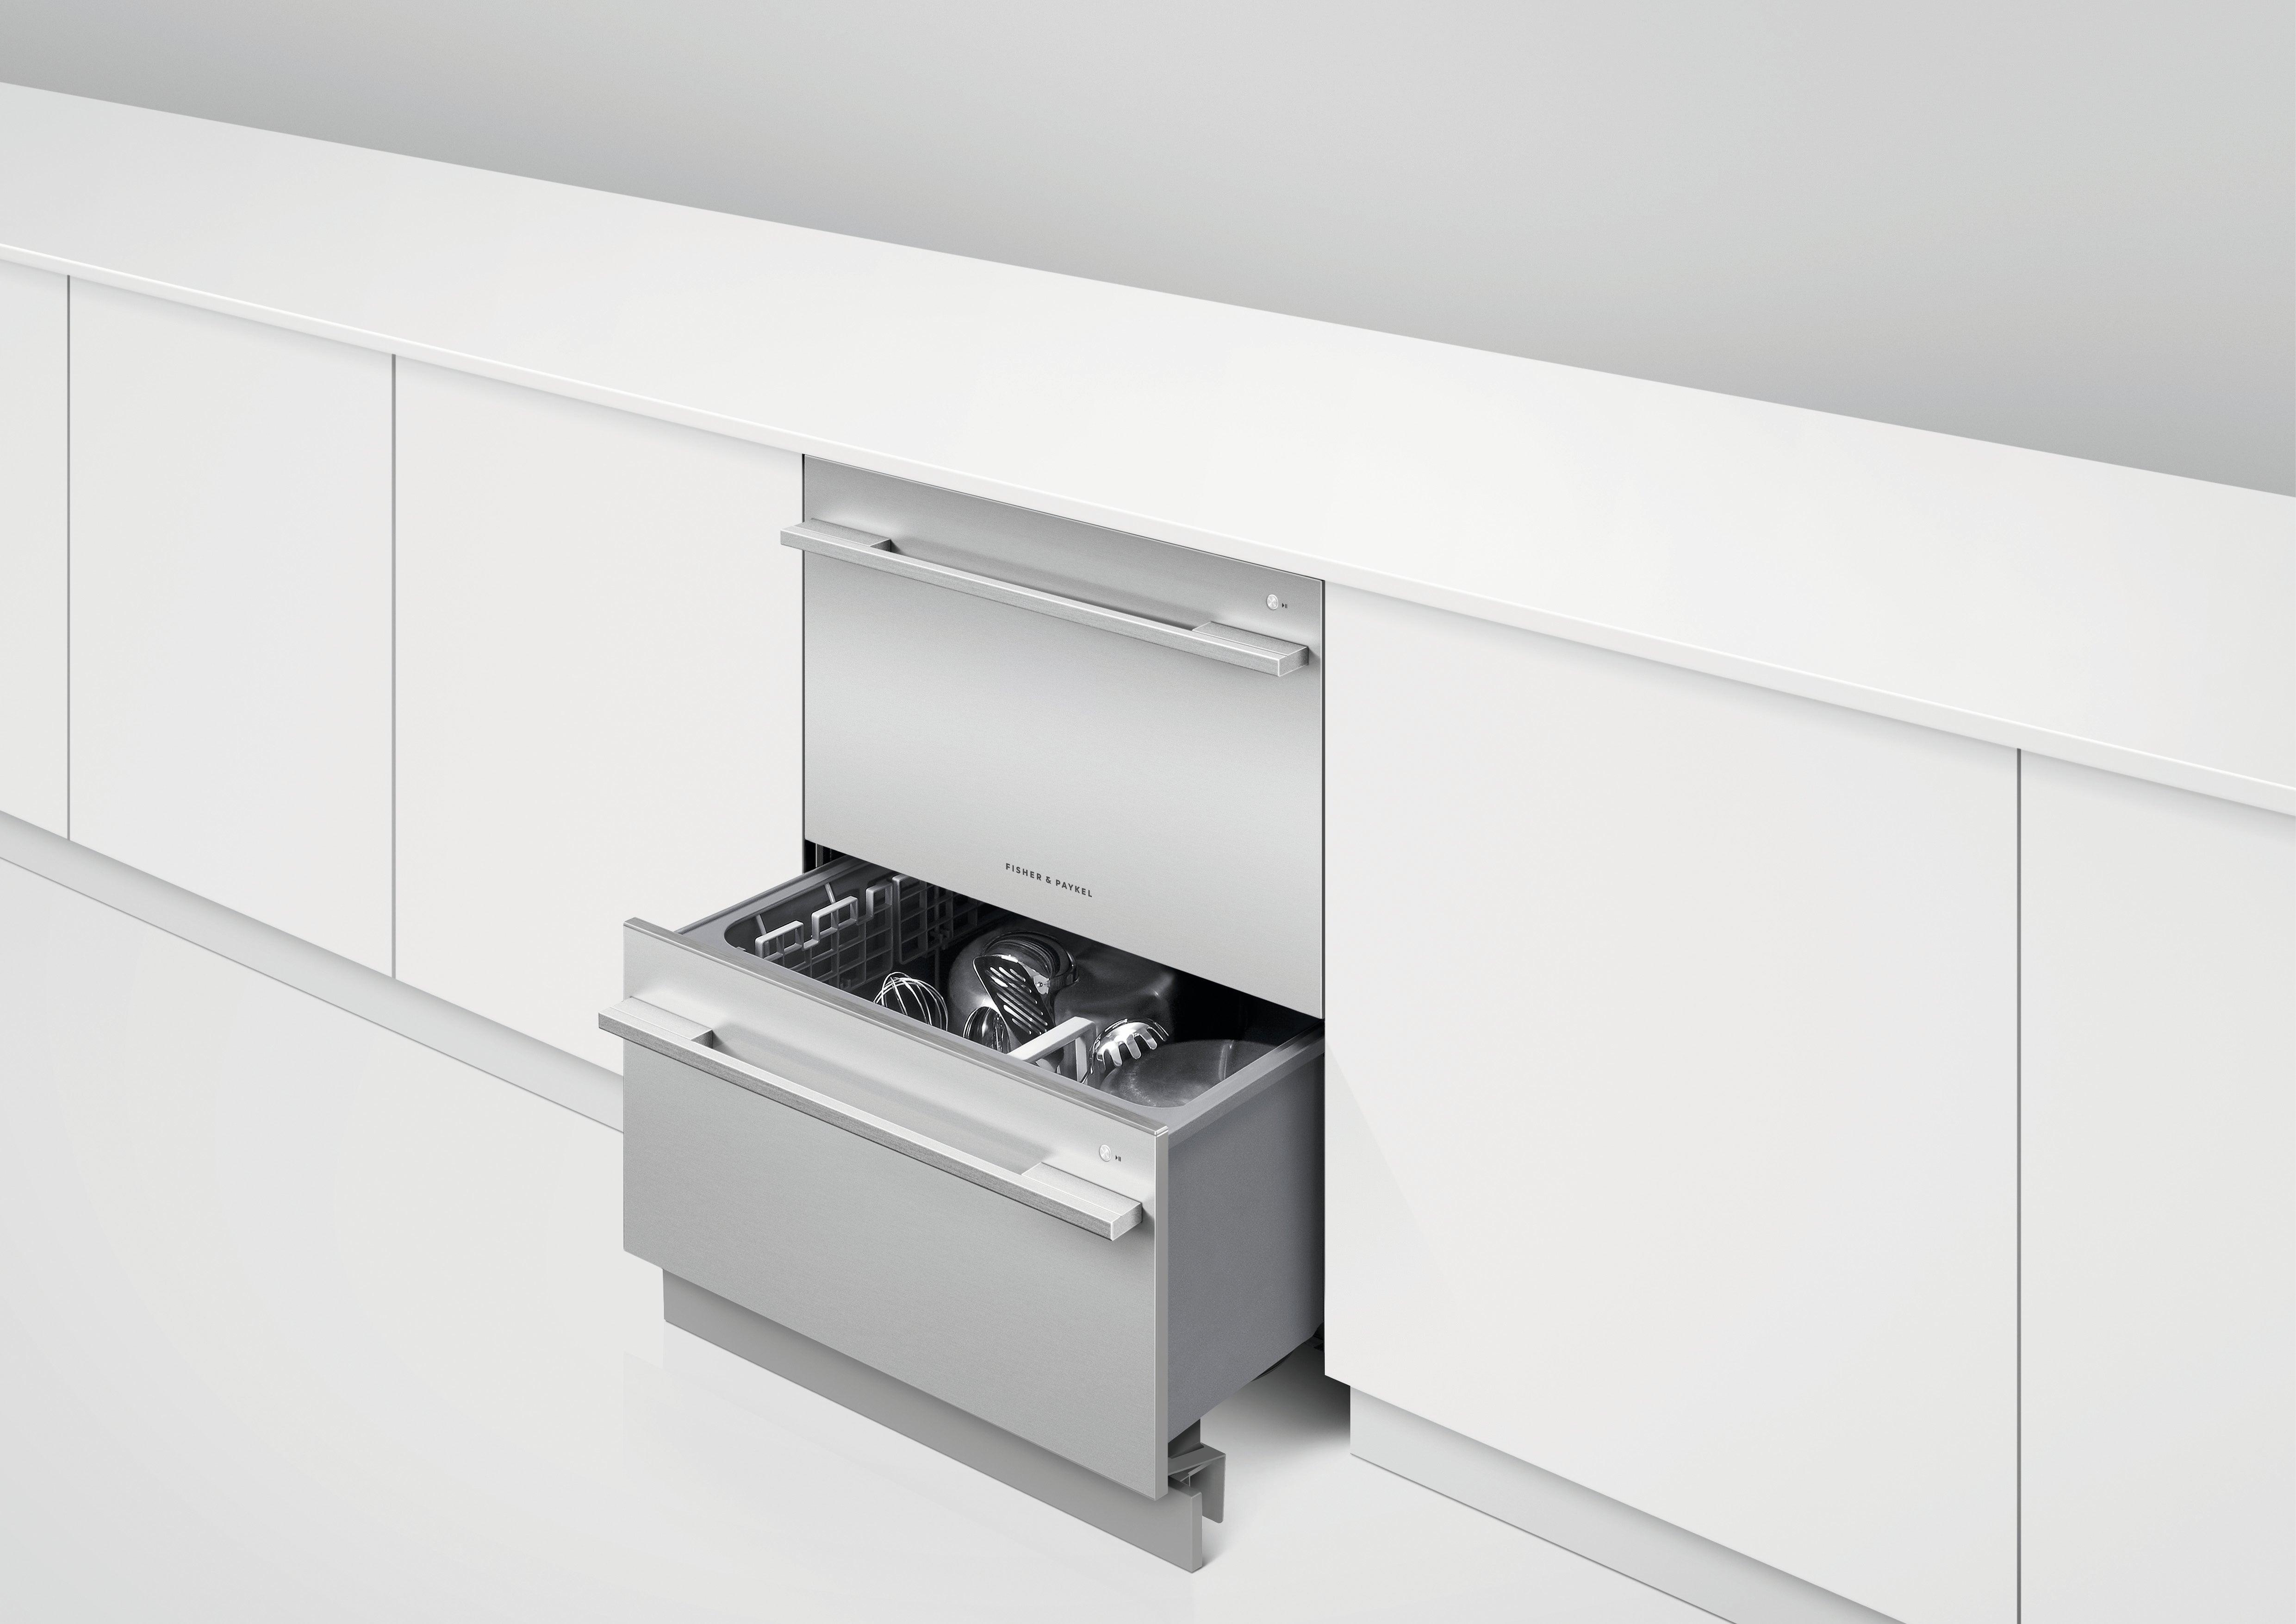 Fisher & Paykel, 60cm, 12 Place Double DishDrawer Dishwasher, Stainless Steel| DD60DDFHX9 - Peter Murphy Lighting & Electrical Ltd